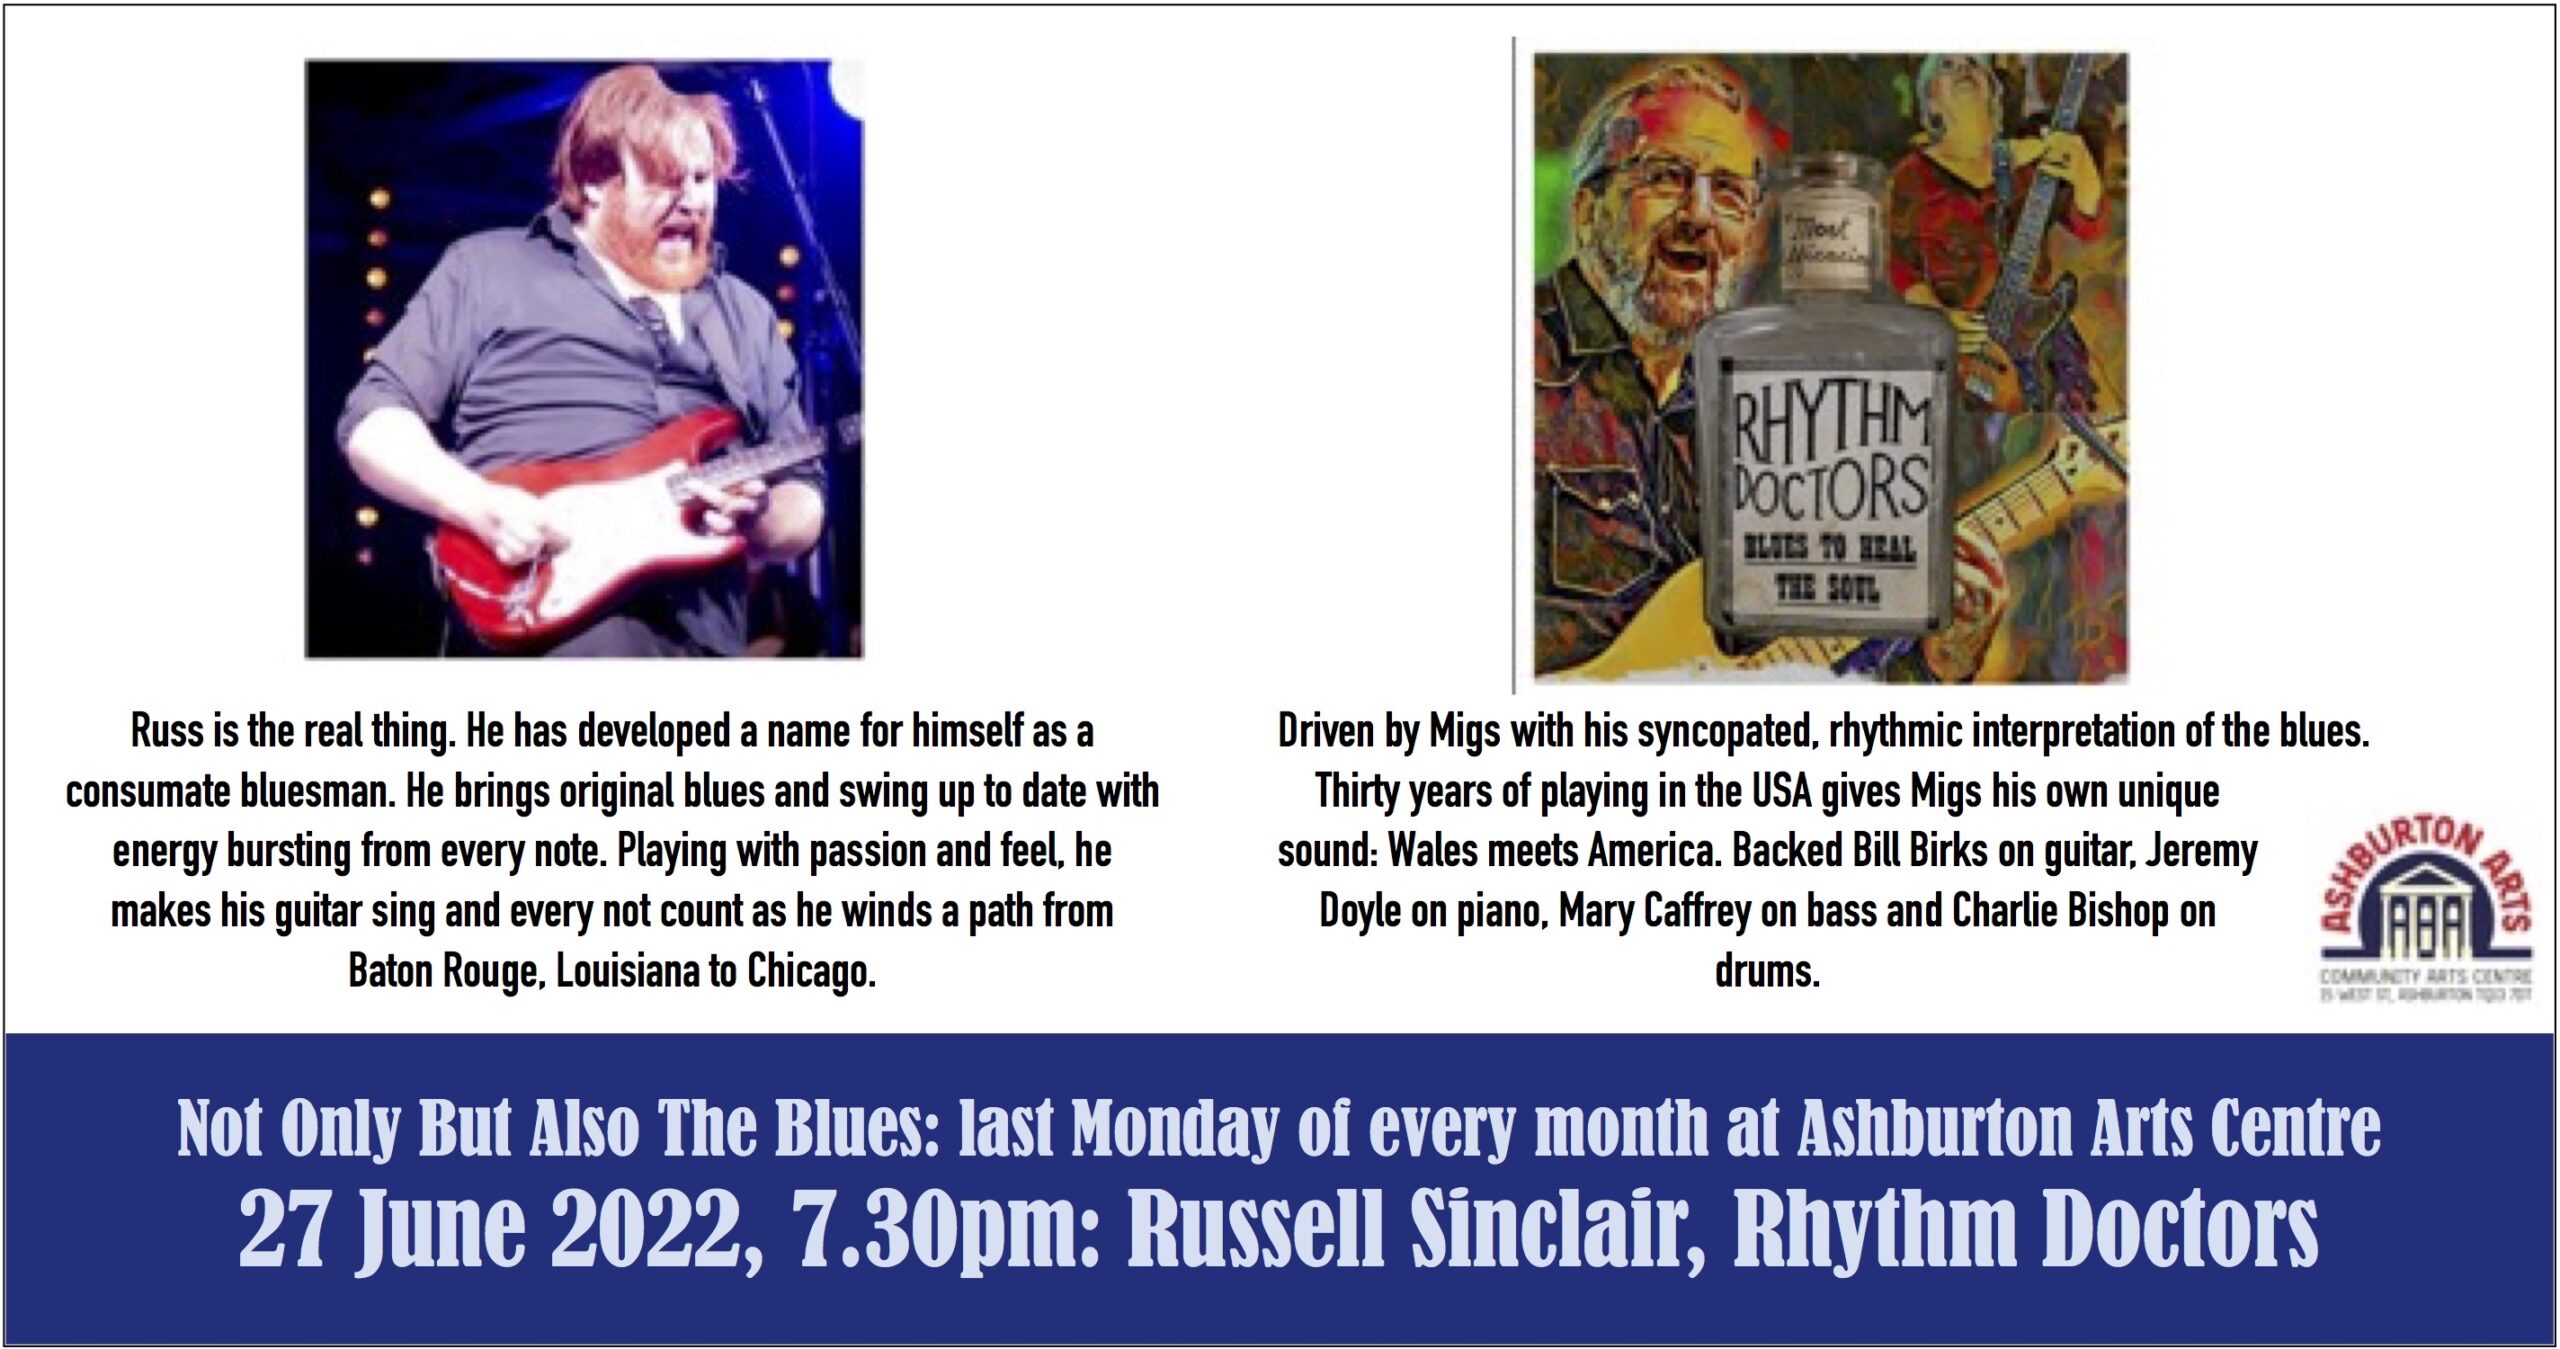 Not Only But Also The Blues: Russell Sinclair / Rhythm Doctors / Acoustic Jam Session